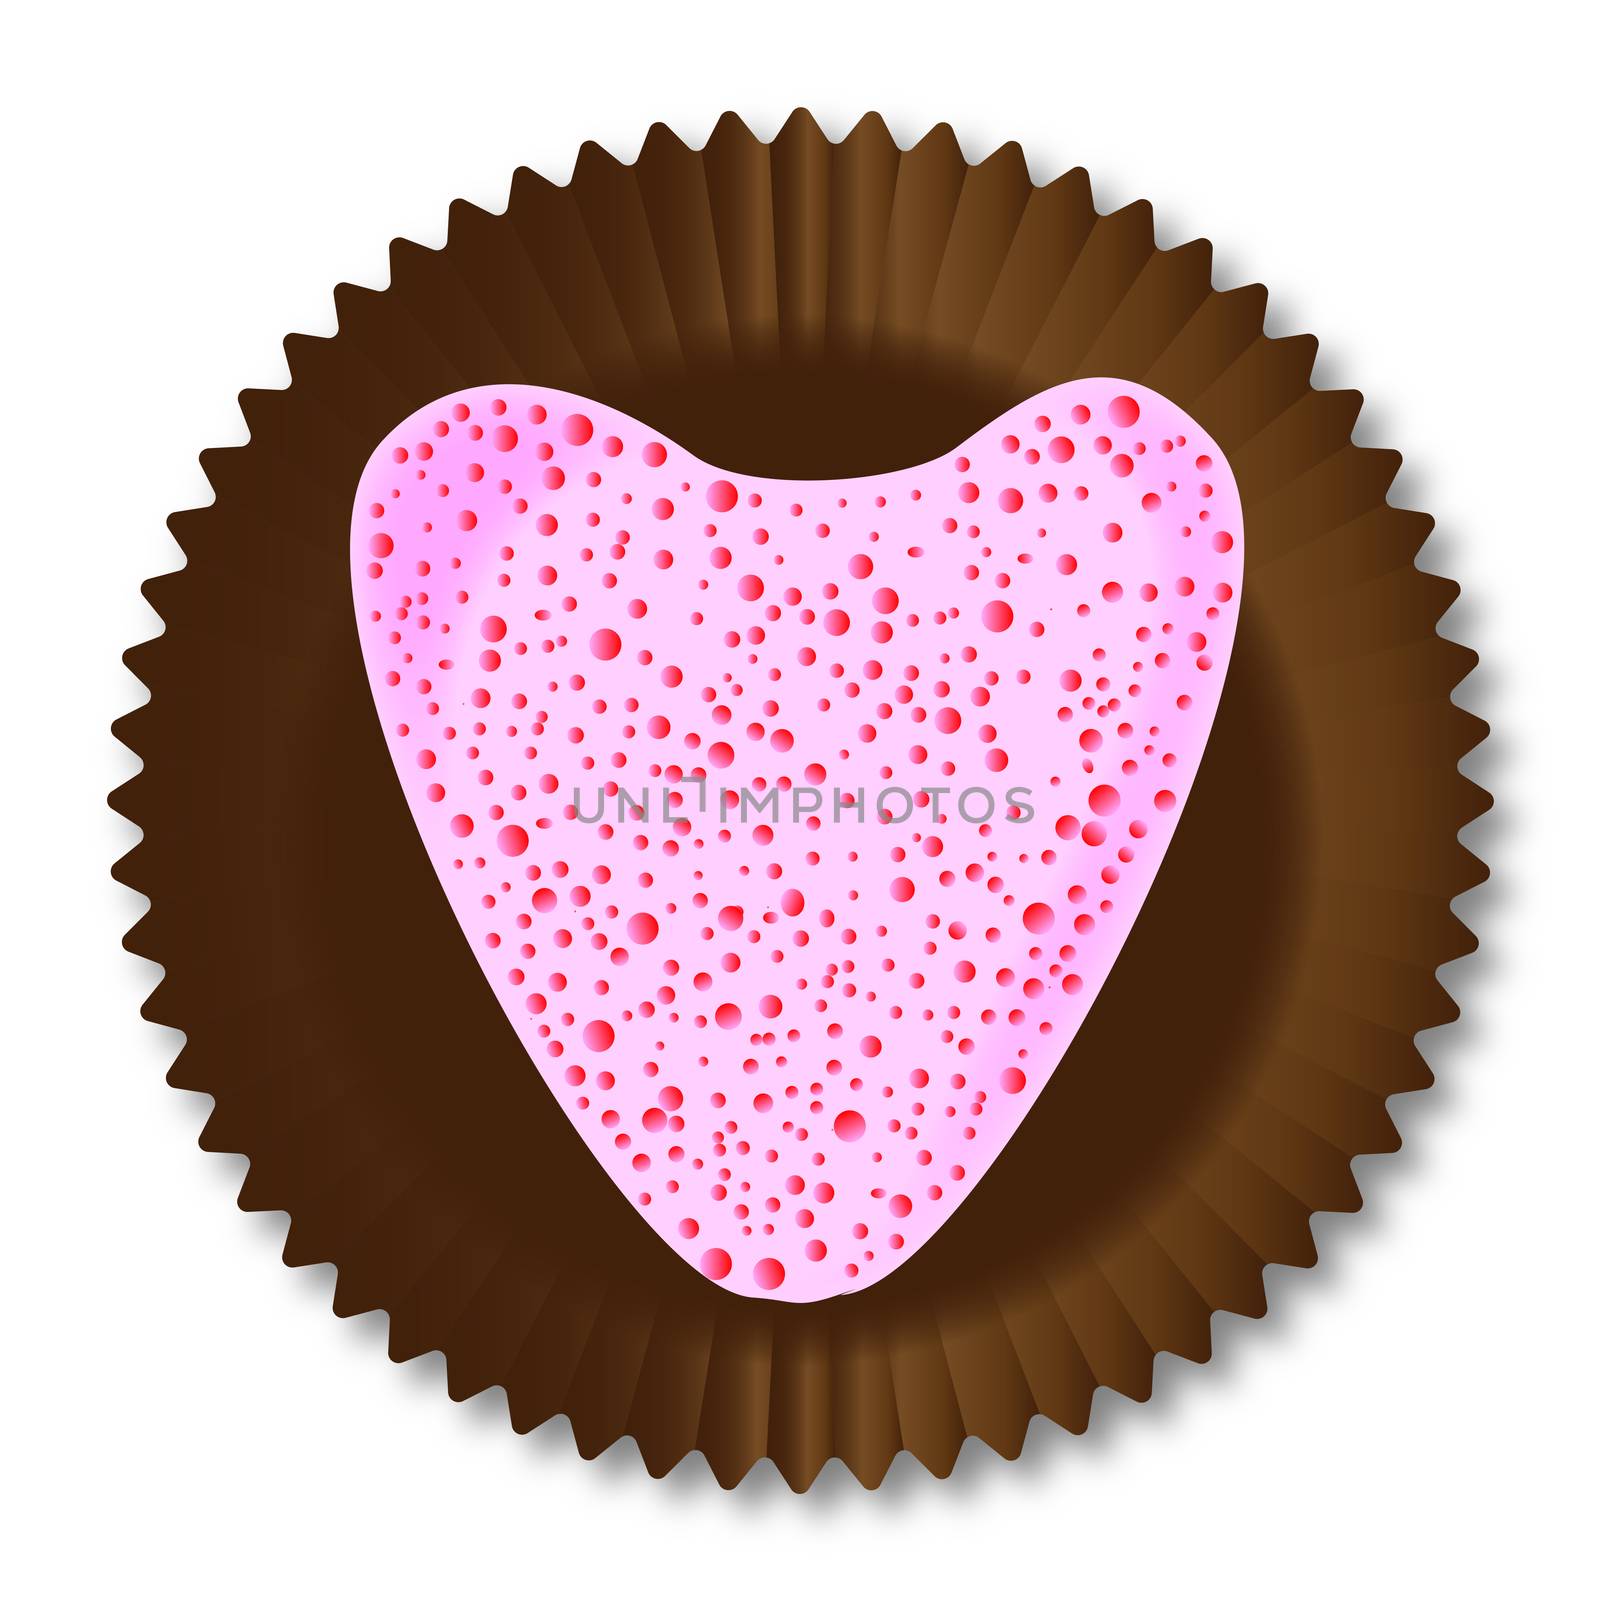 A typical strawberry flavour heart shaped chocolate from a chocolate box selextion over a white background